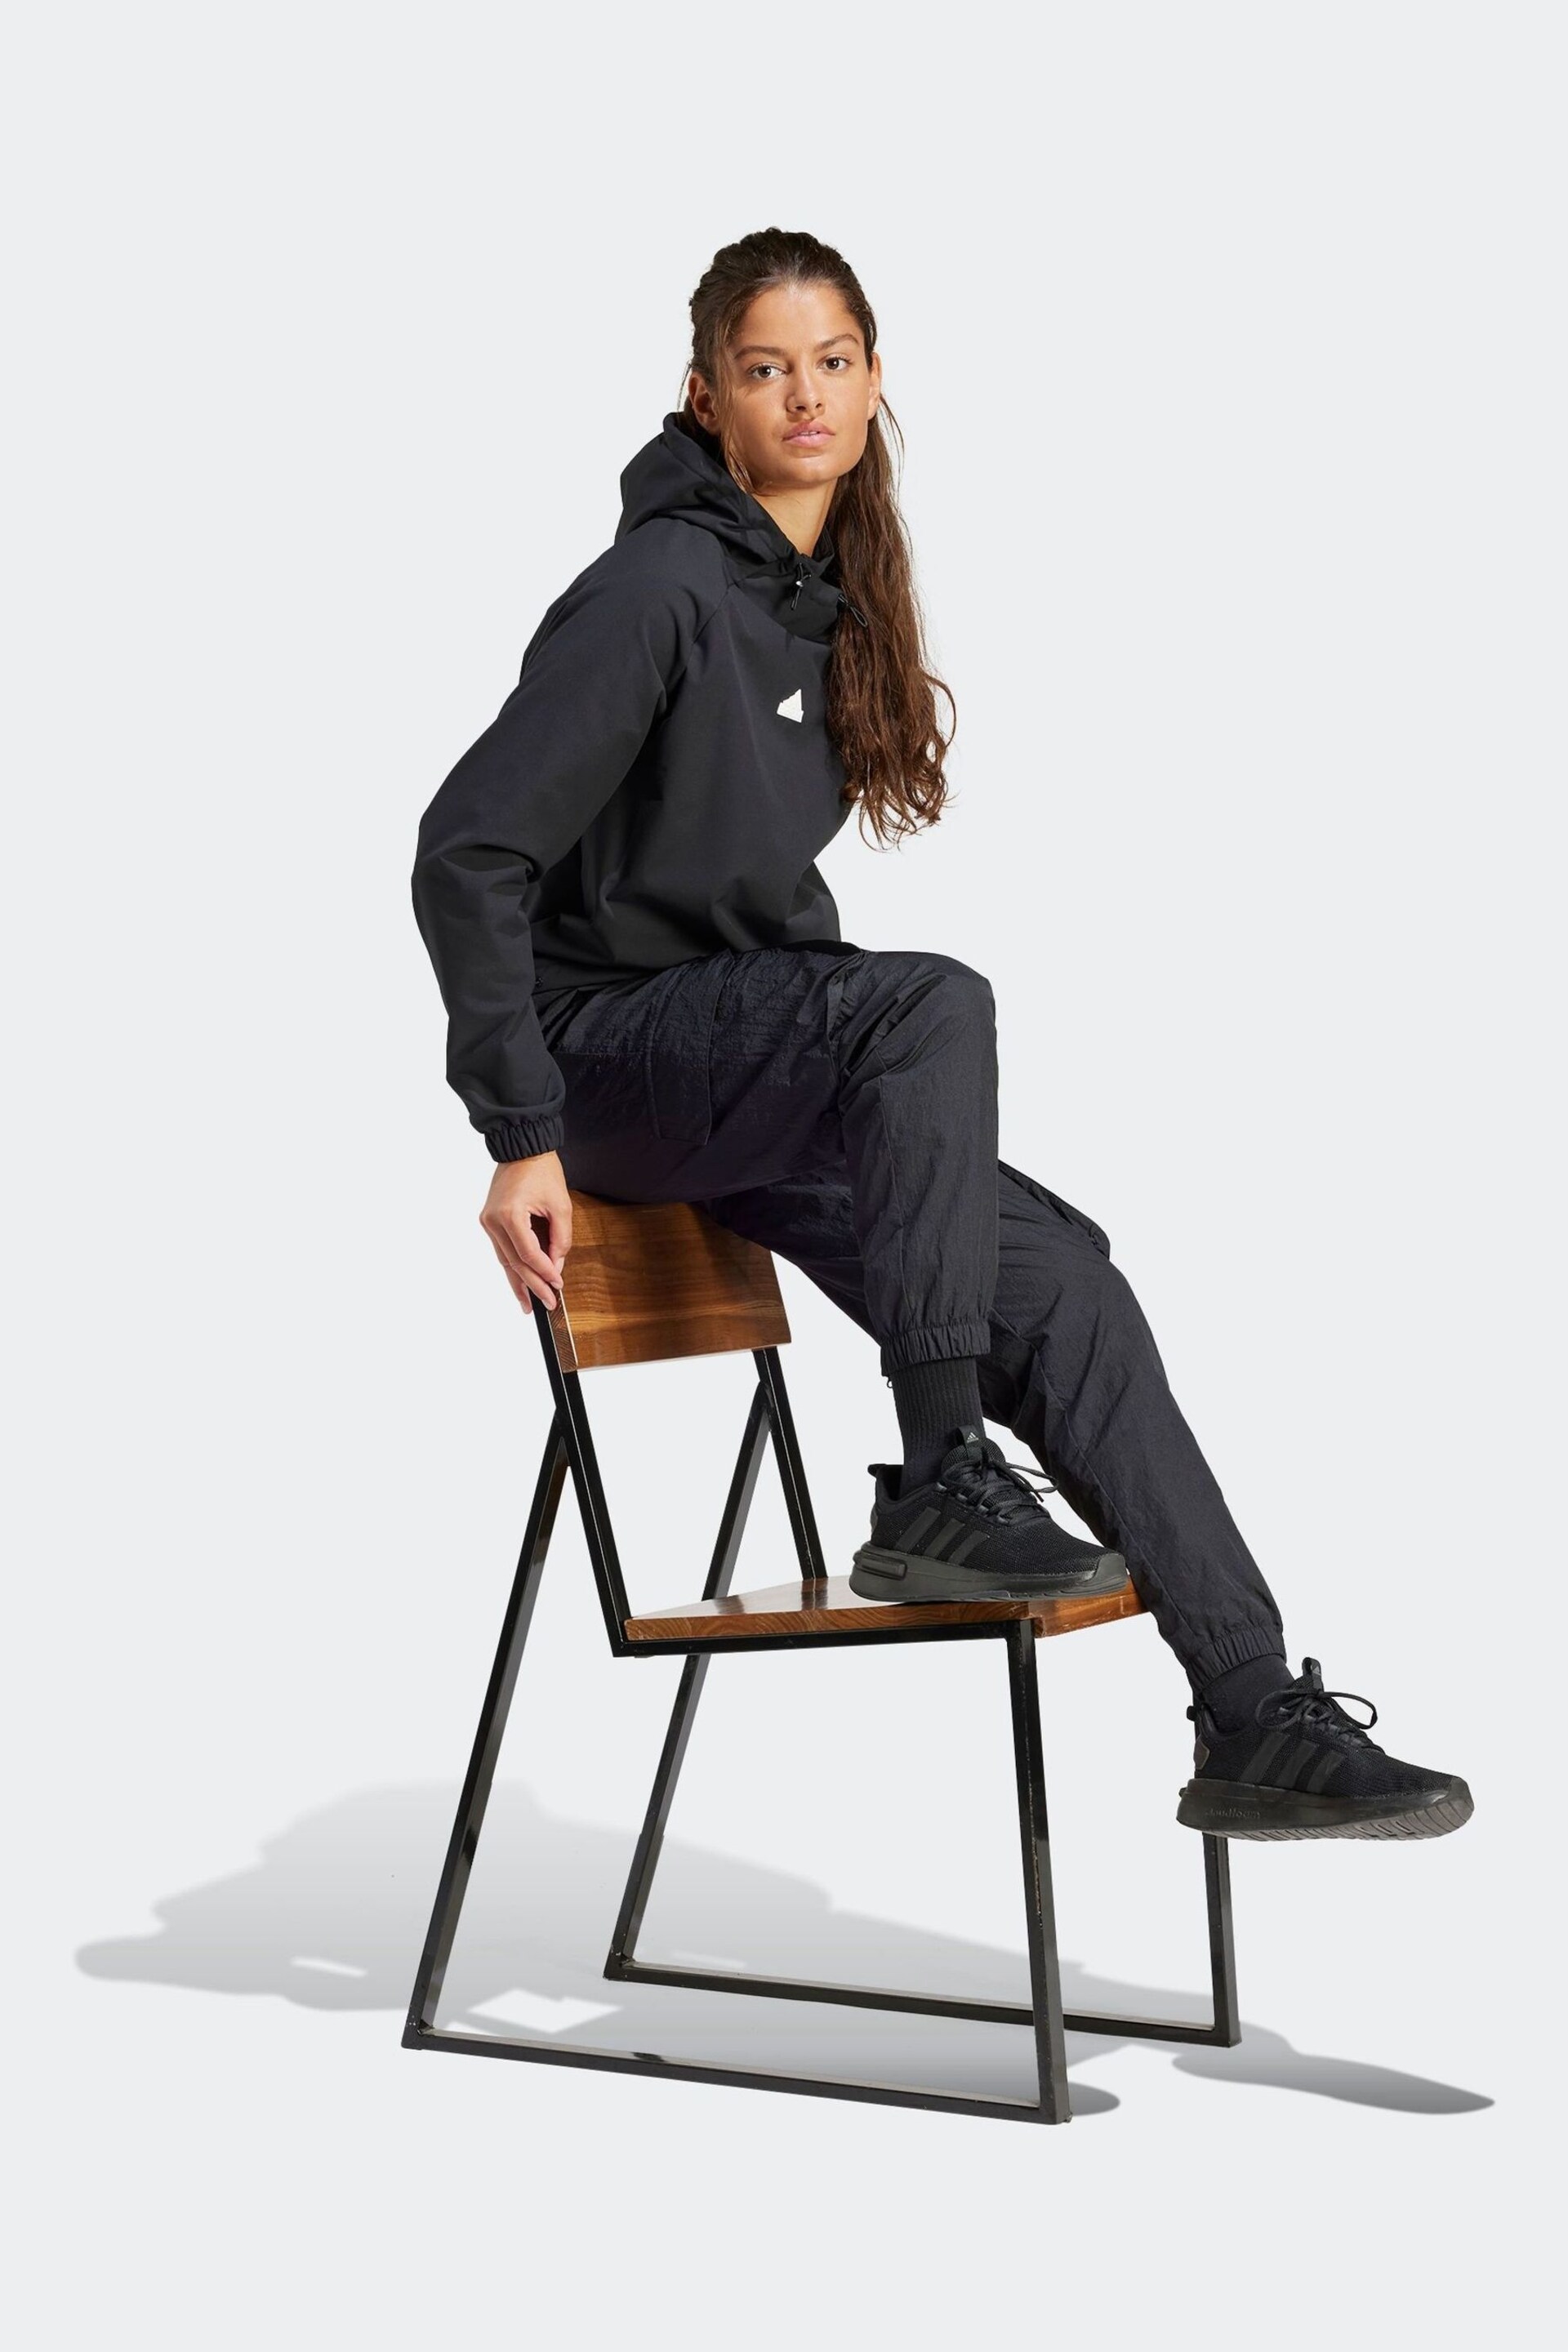 adidas Black Sportswear City Escape Hoodie With Bungee Cord - Image 3 of 7